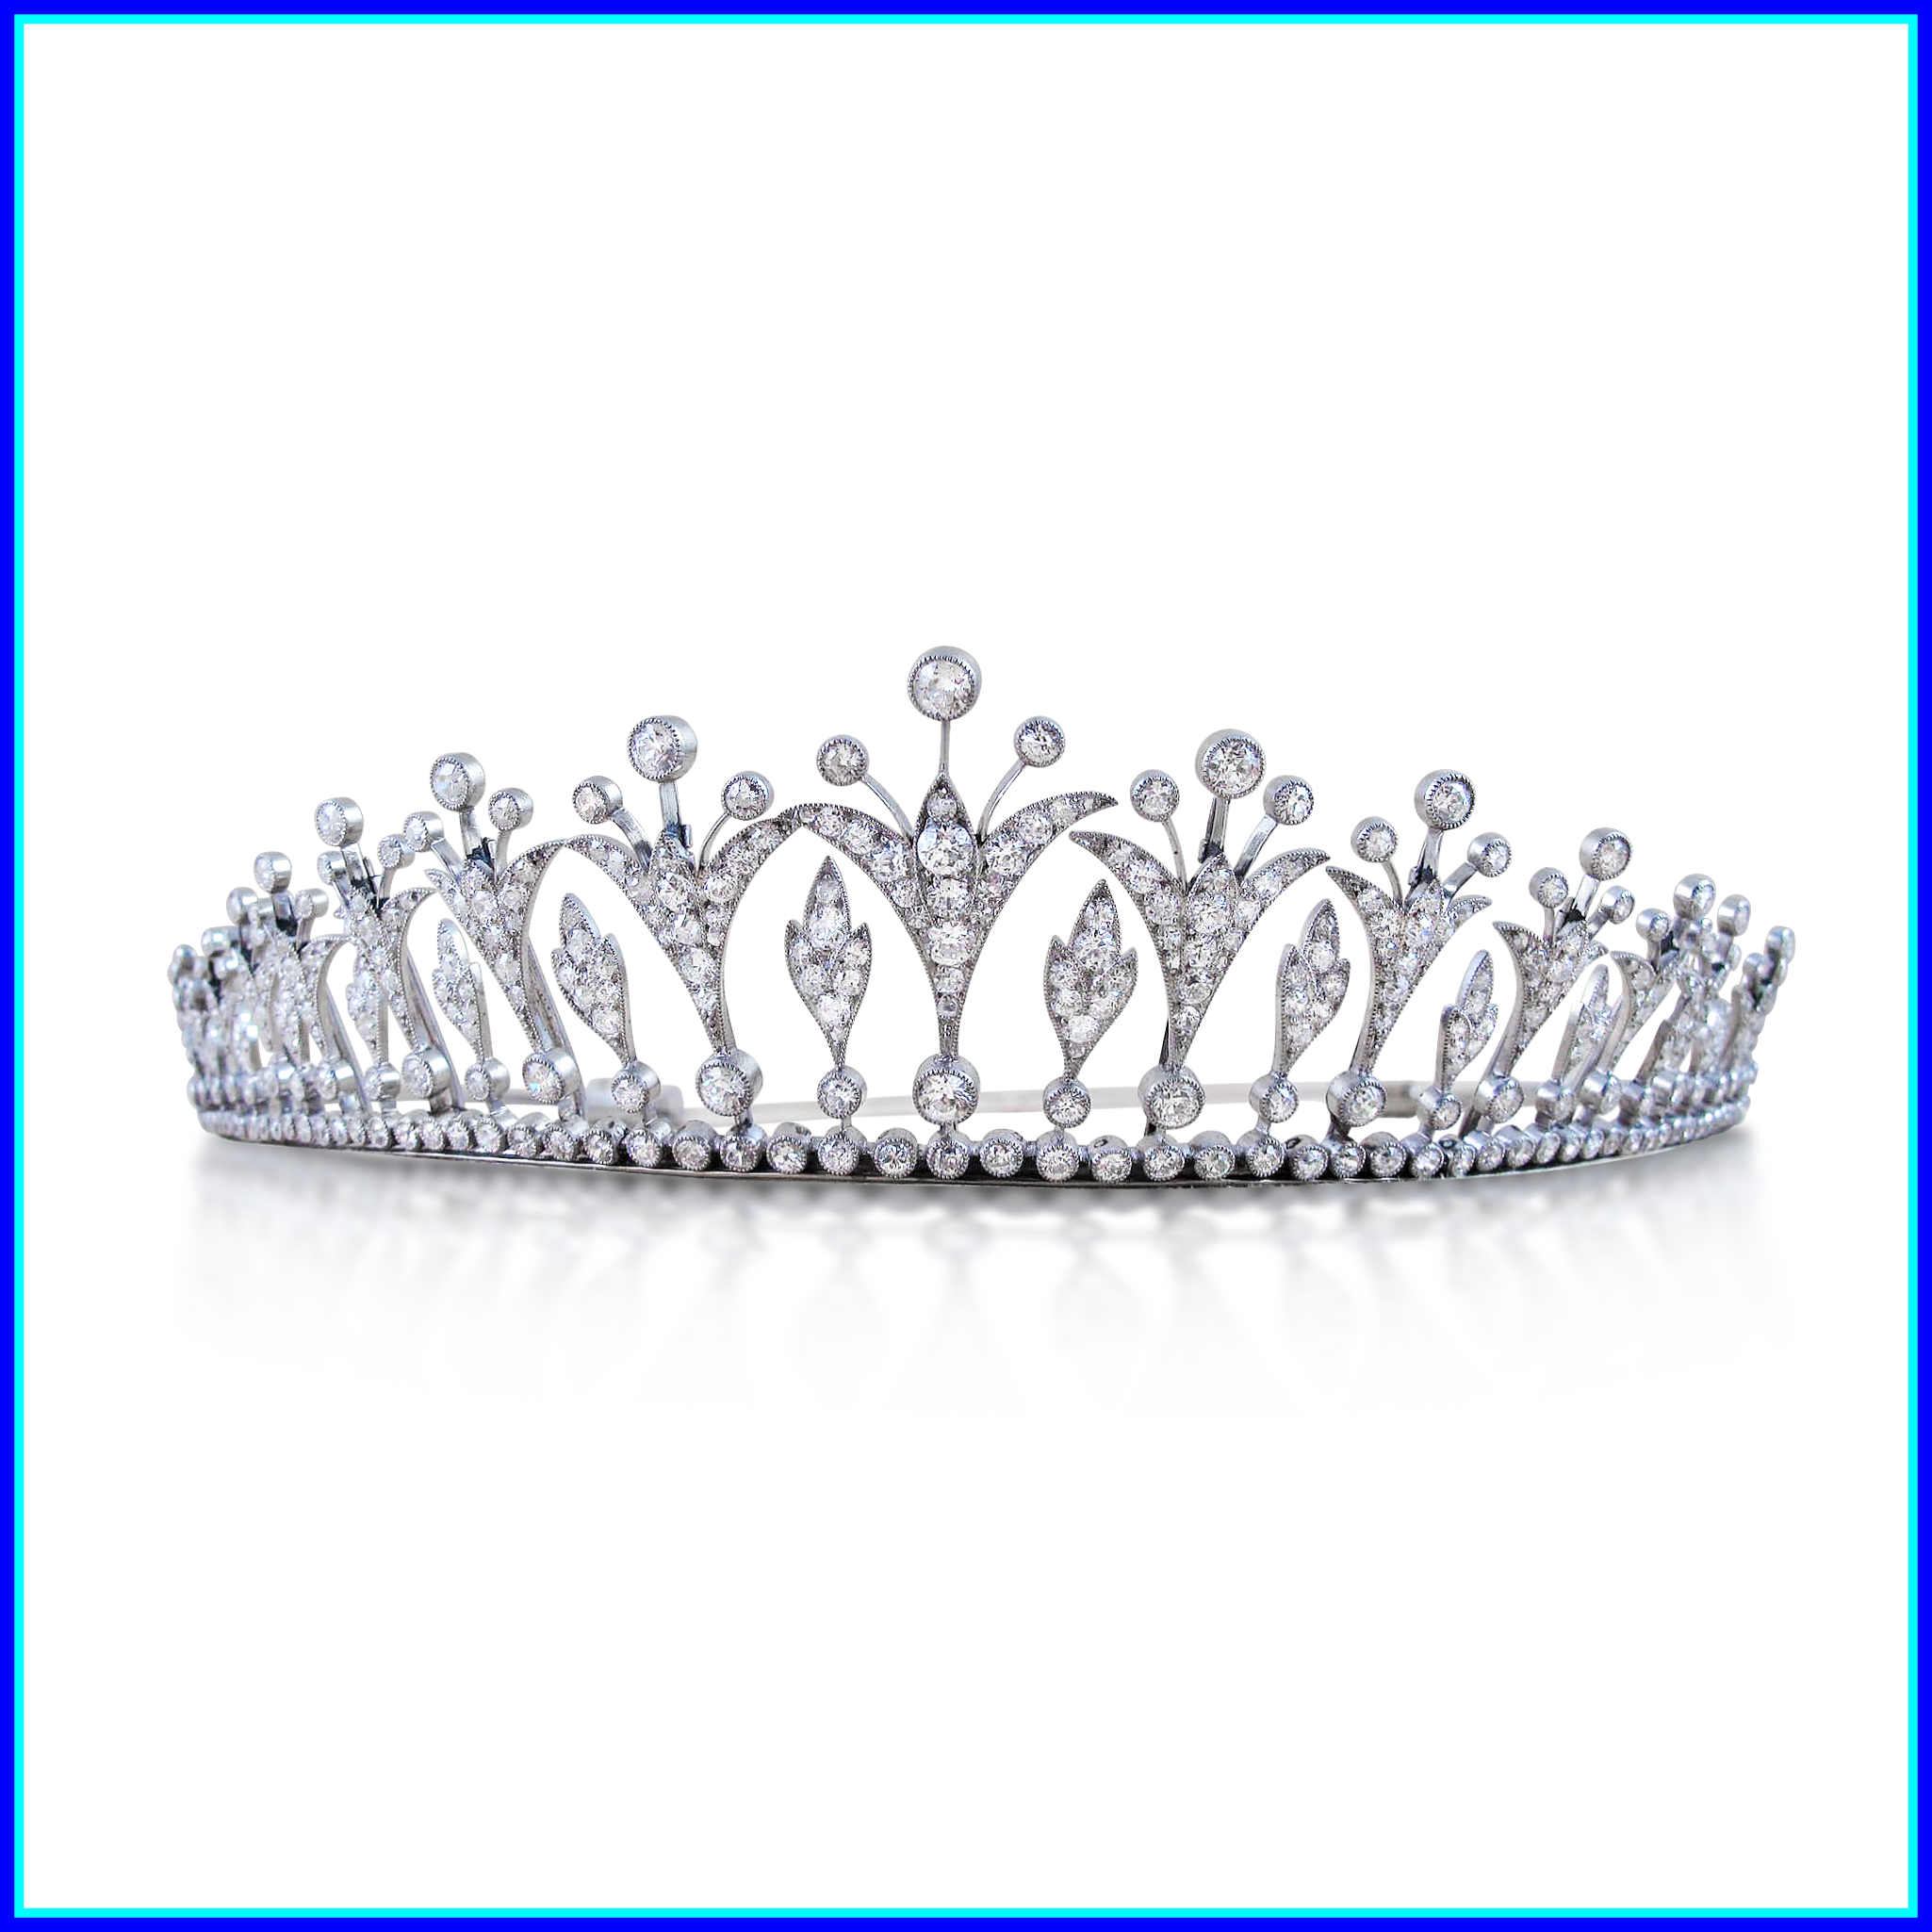 Princess Crown Sketch at PaintingValley.com | Explore collection of